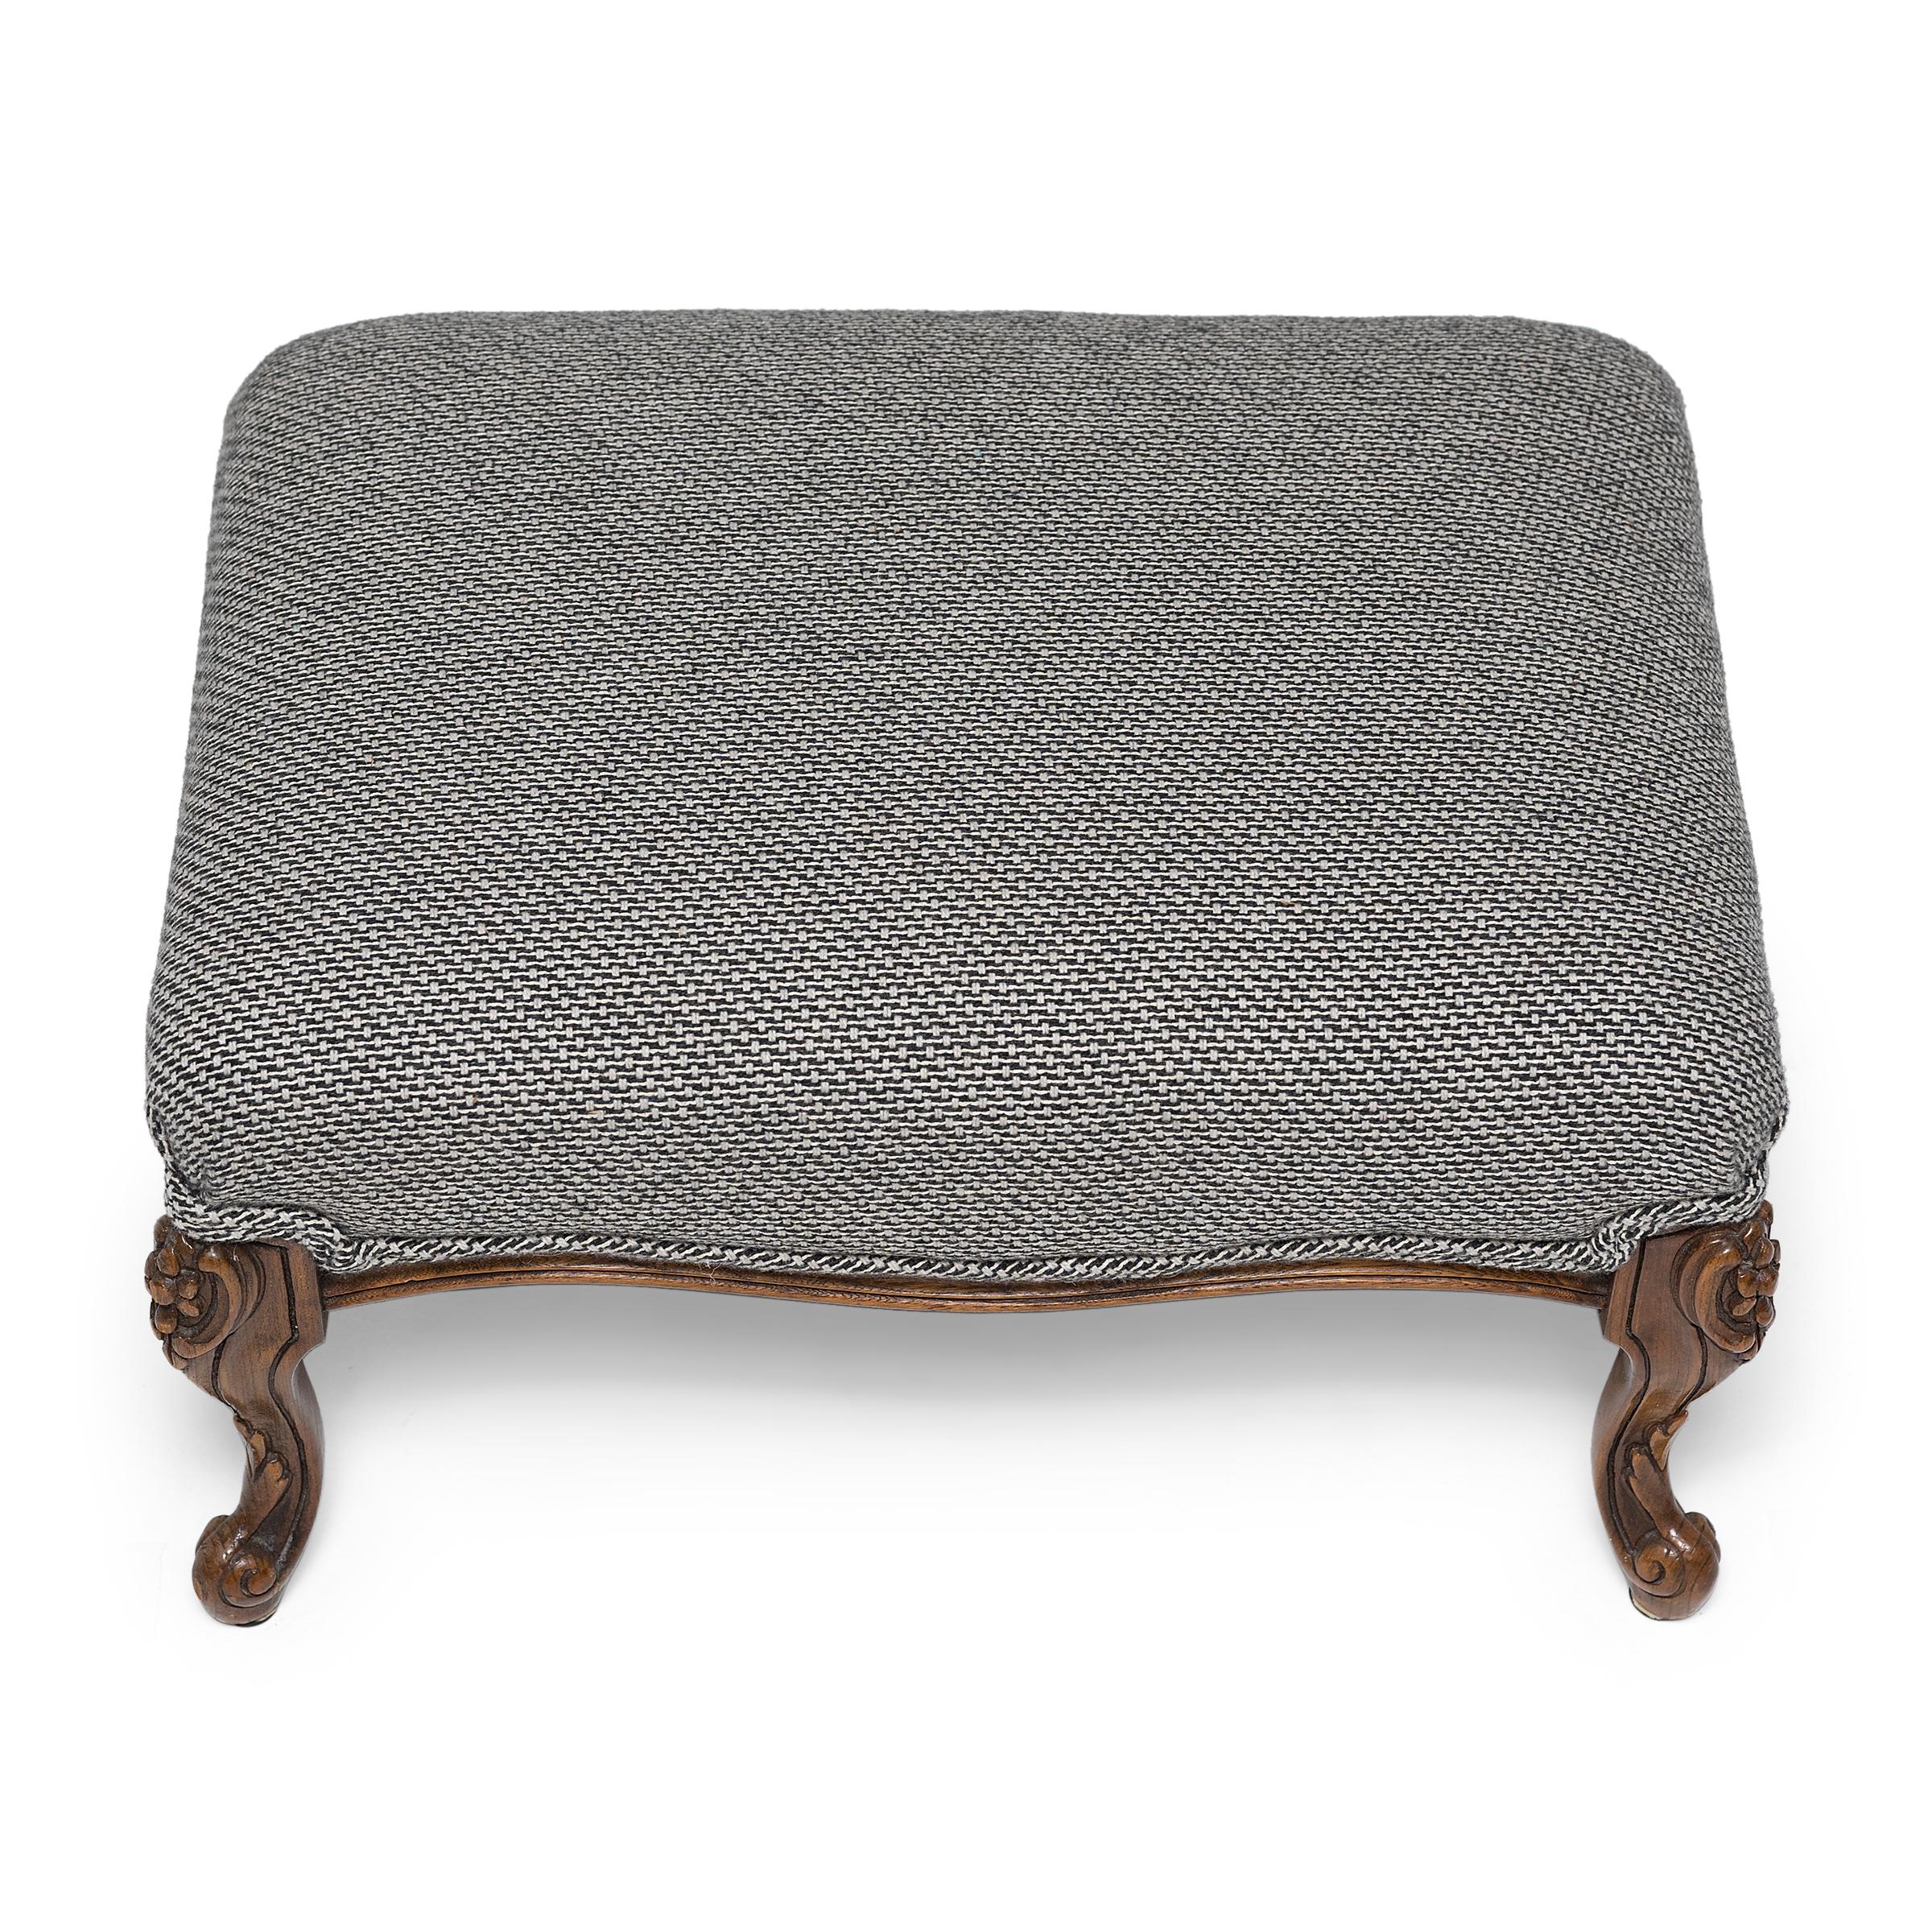 French Louis XV Style Upholstered Footstool, c. 1850 In Good Condition For Sale In Chicago, IL